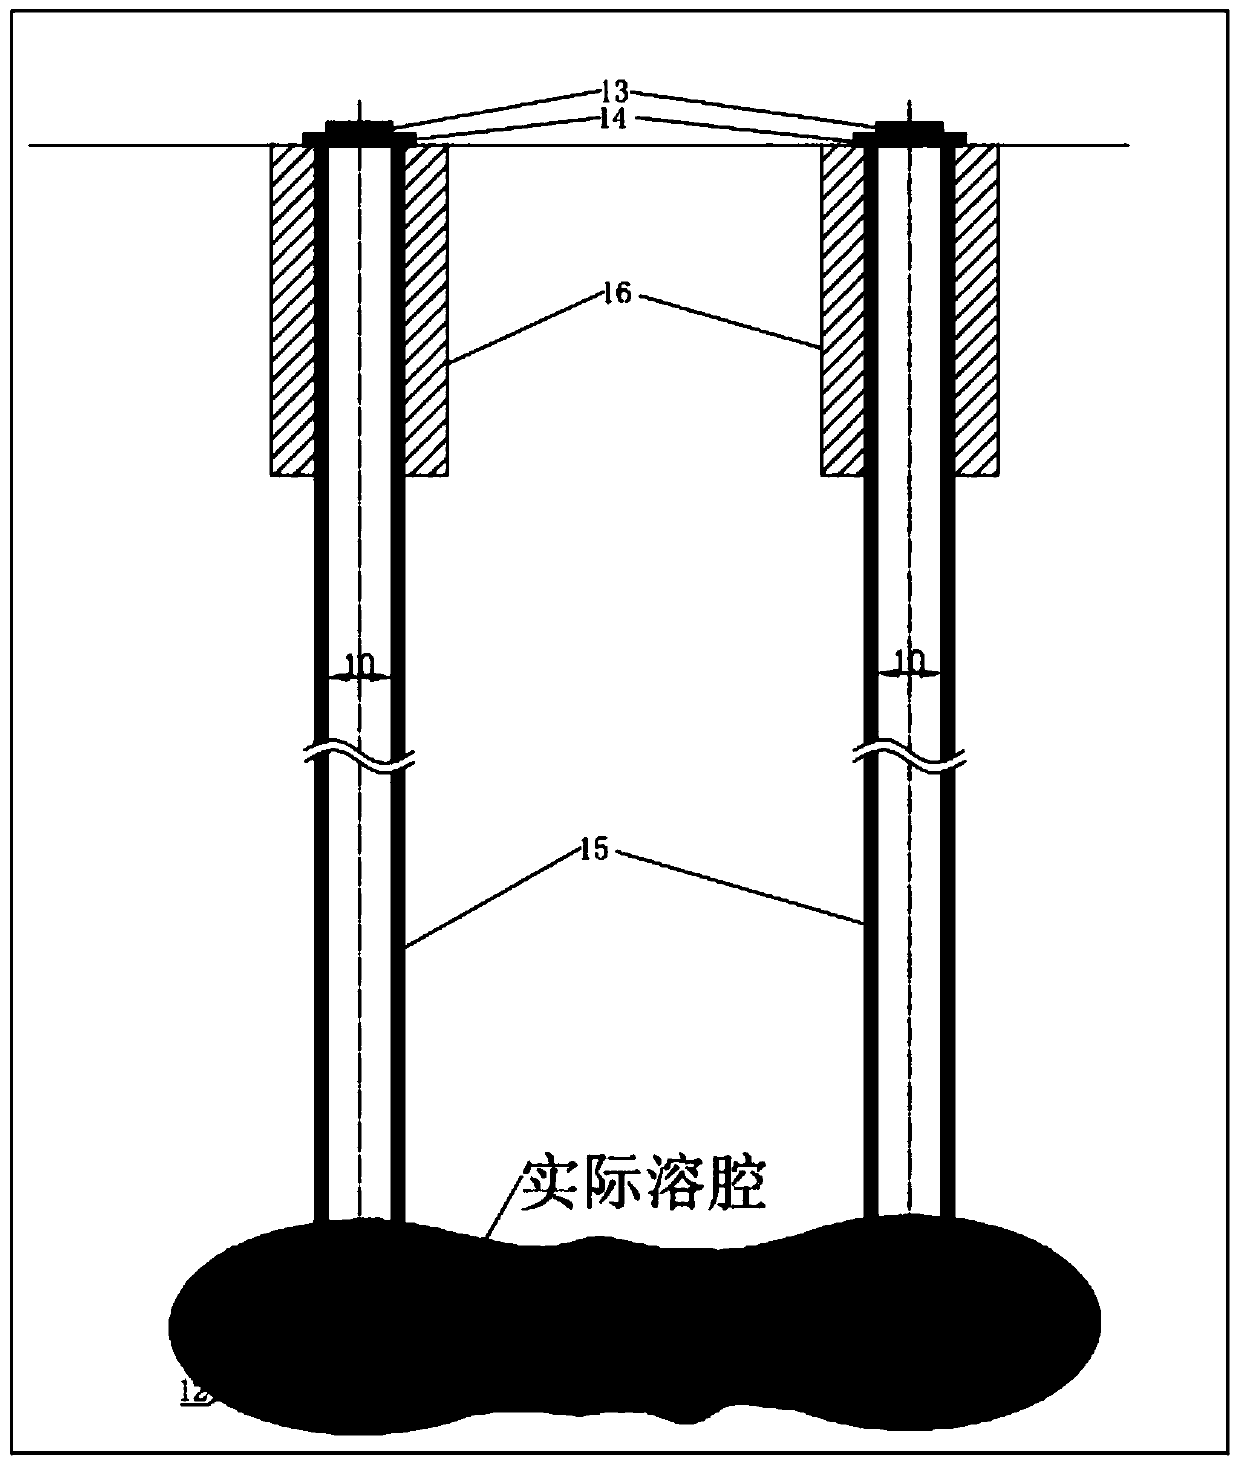 Auxiliary pressurizing reheating type compressed air energy storage system and method based on double-well structure hot salt well